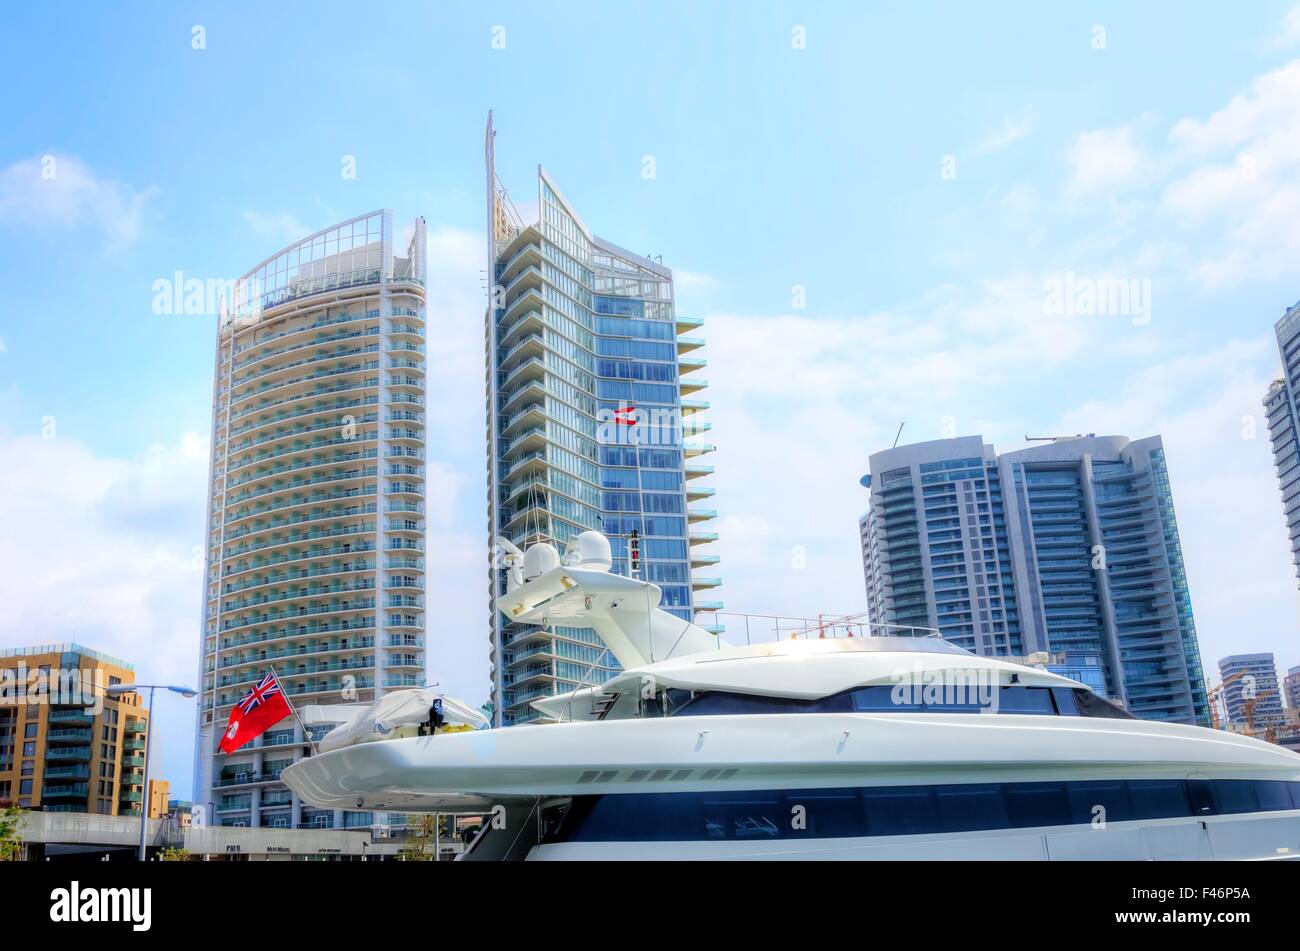 A view of a yacht and towers at the beautiful Marina in Zaitunay Bay in Beirut, Lebanon. A very modern, high end and newly devel Stock Photo